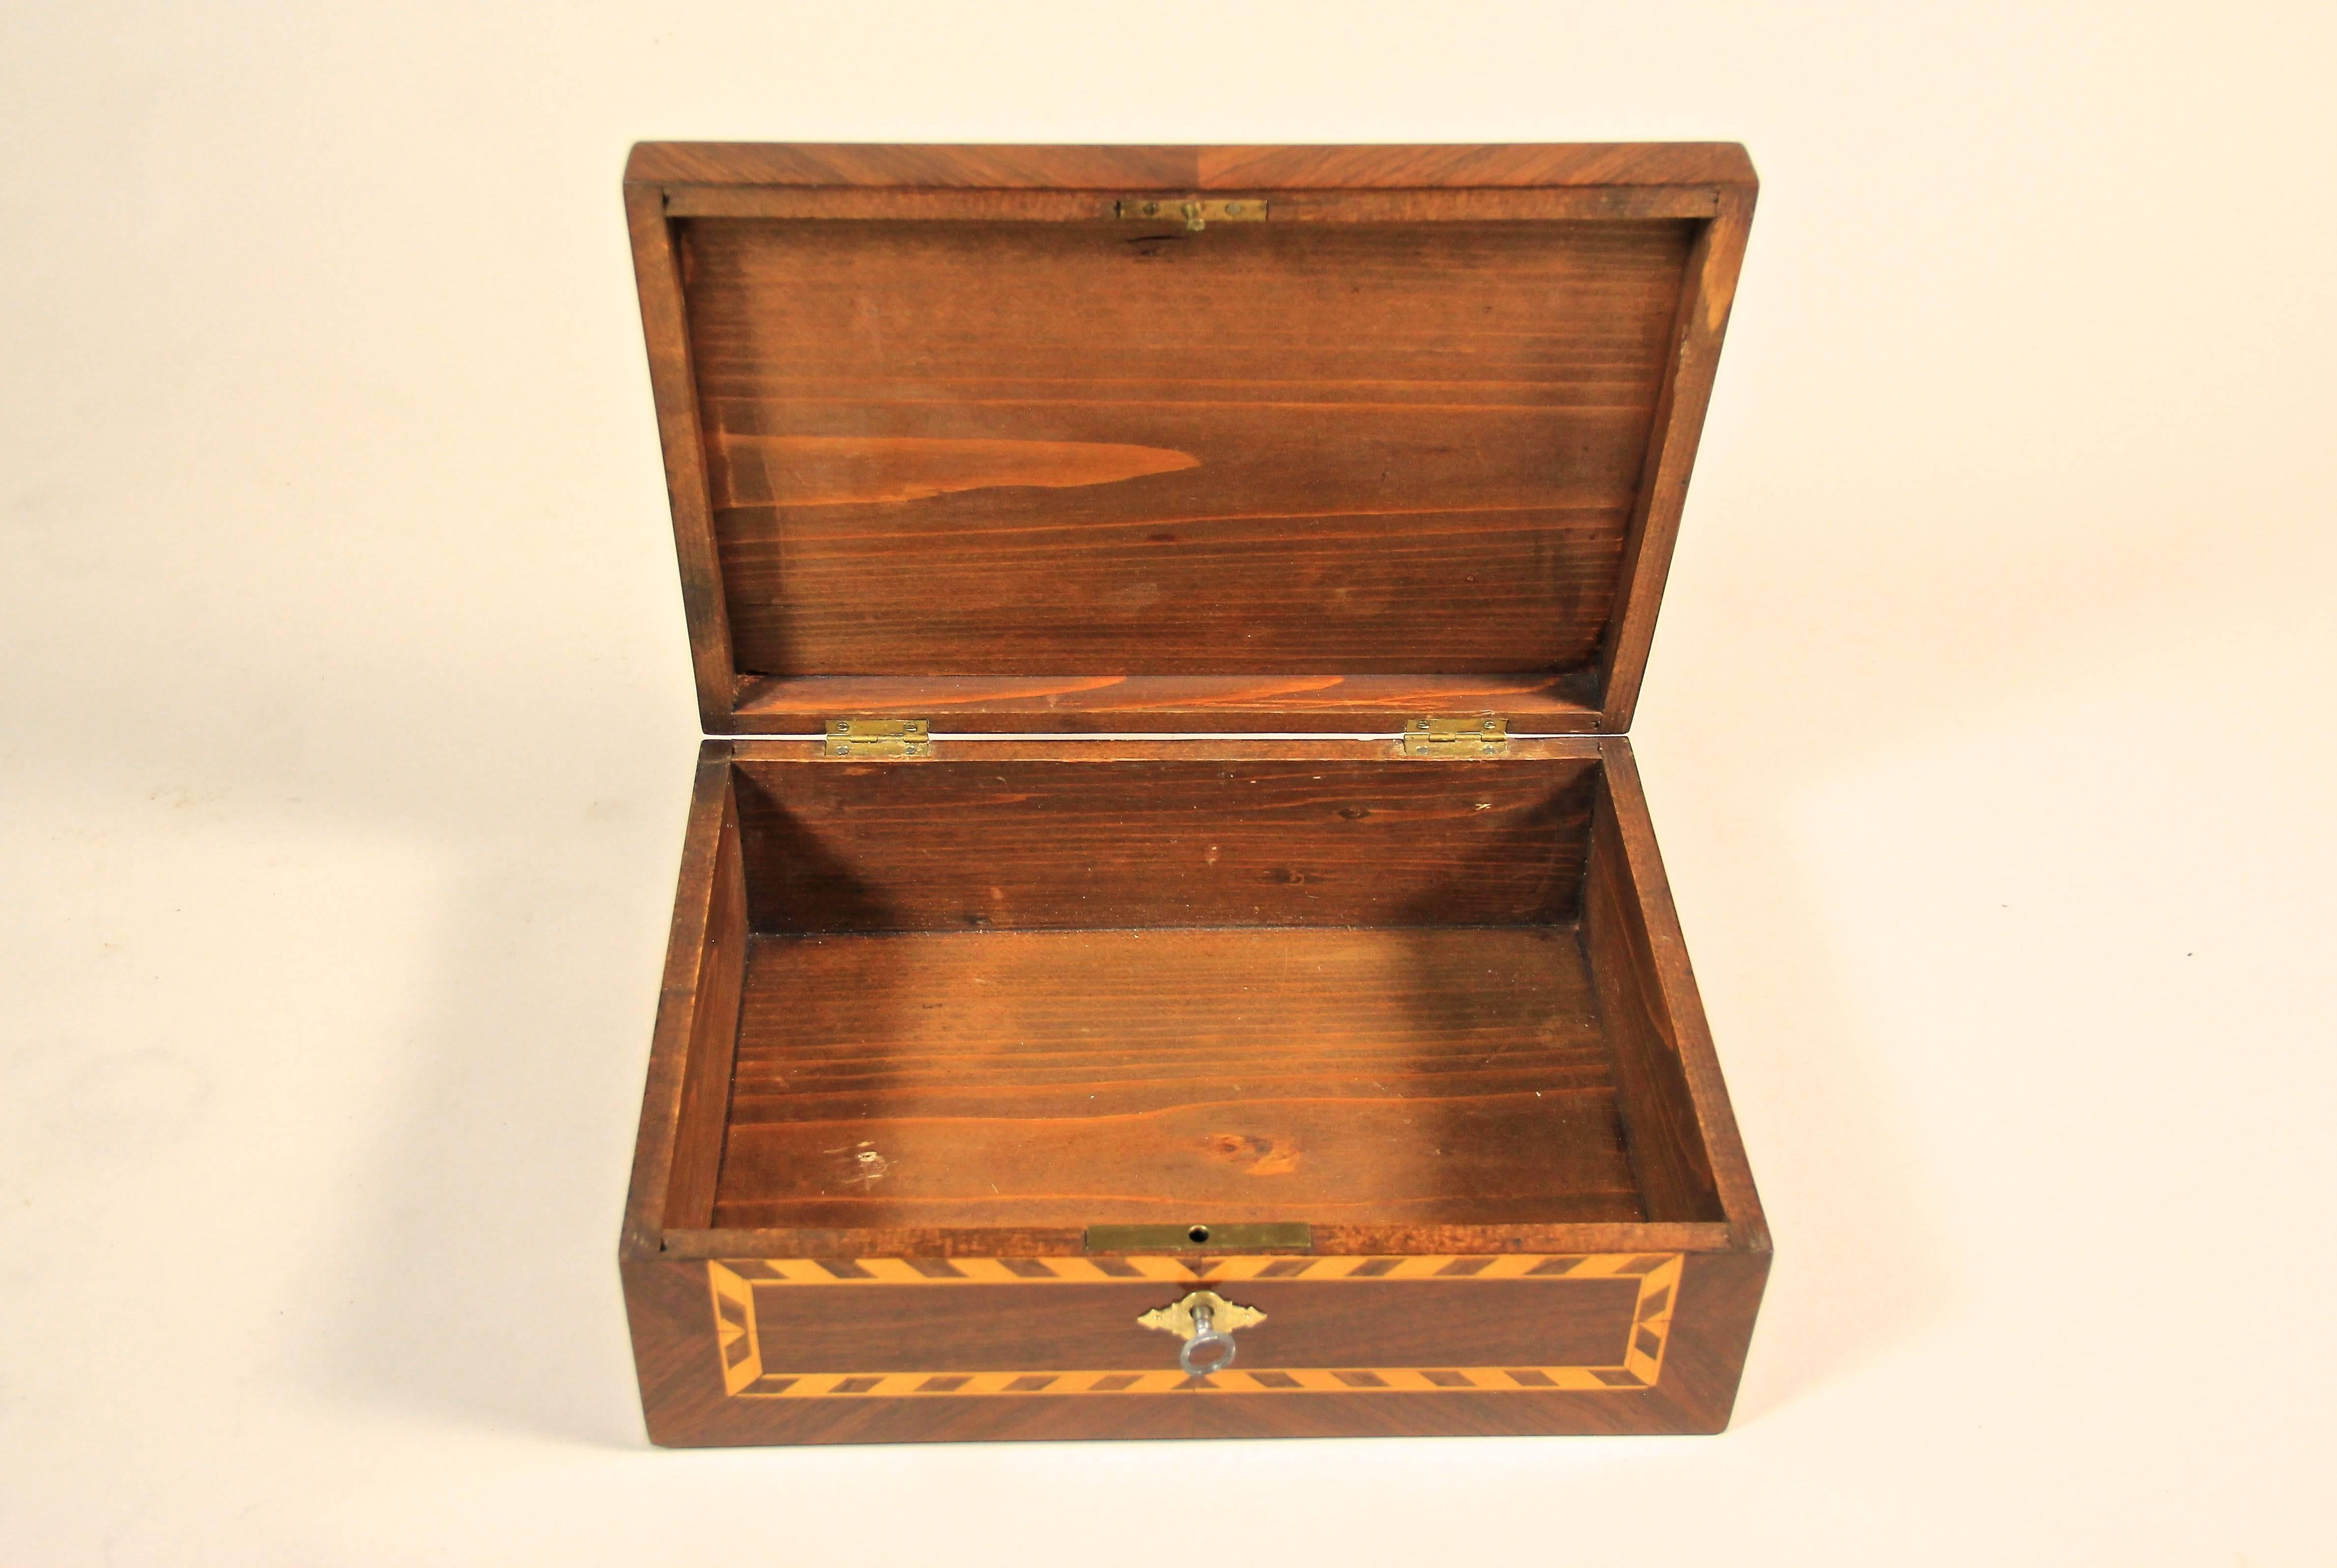 Maple Nutwood Box with Marquetry Work Art Nouveau, Austria, circa 1910